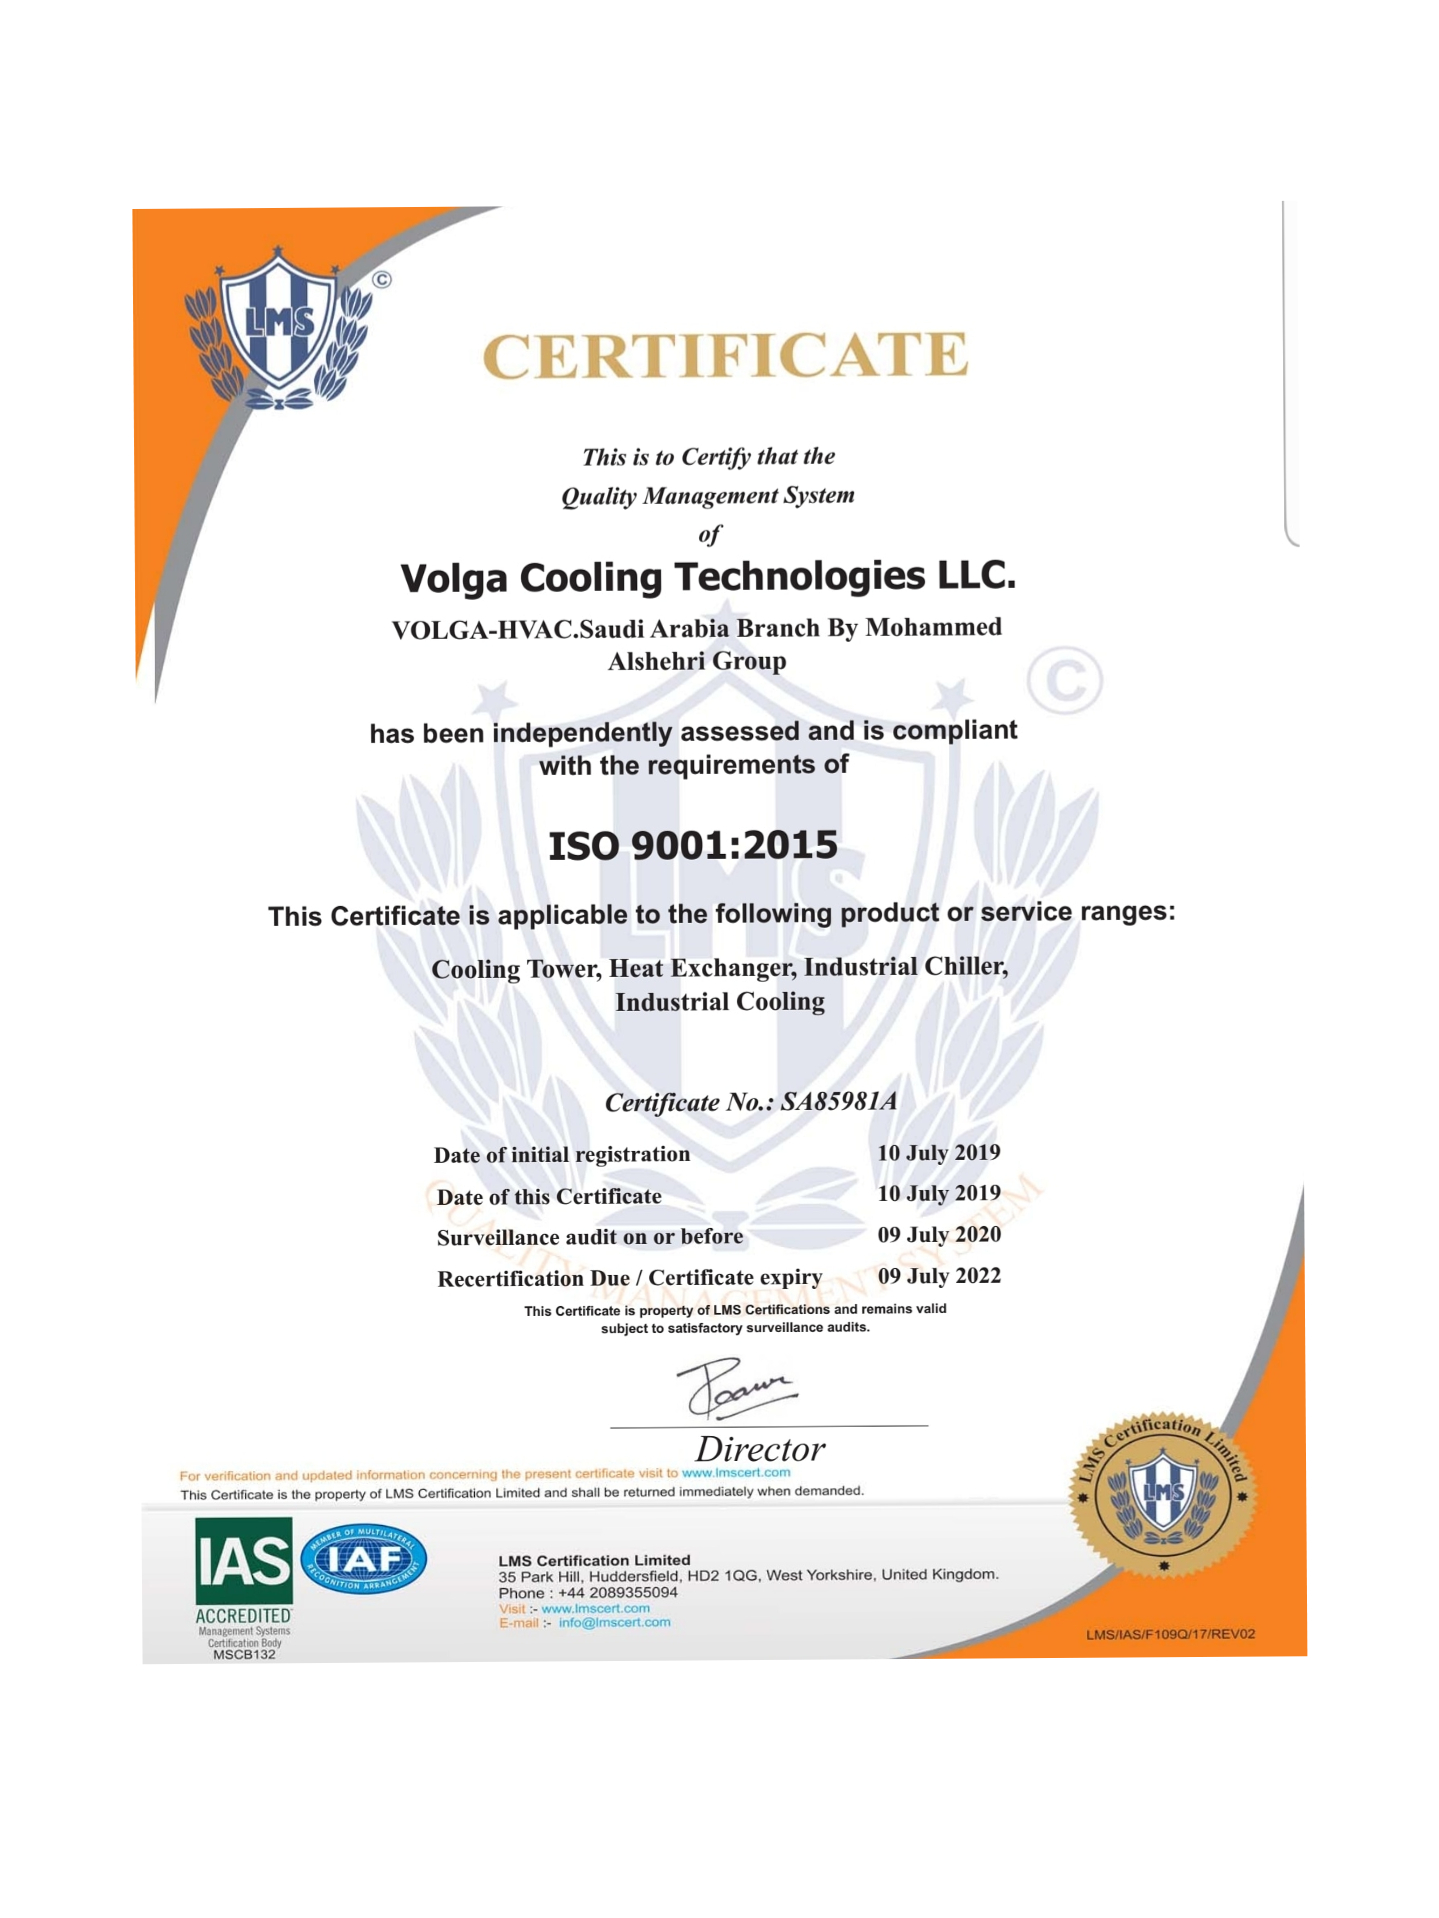 Our Certificate ISO 9001: 2015 